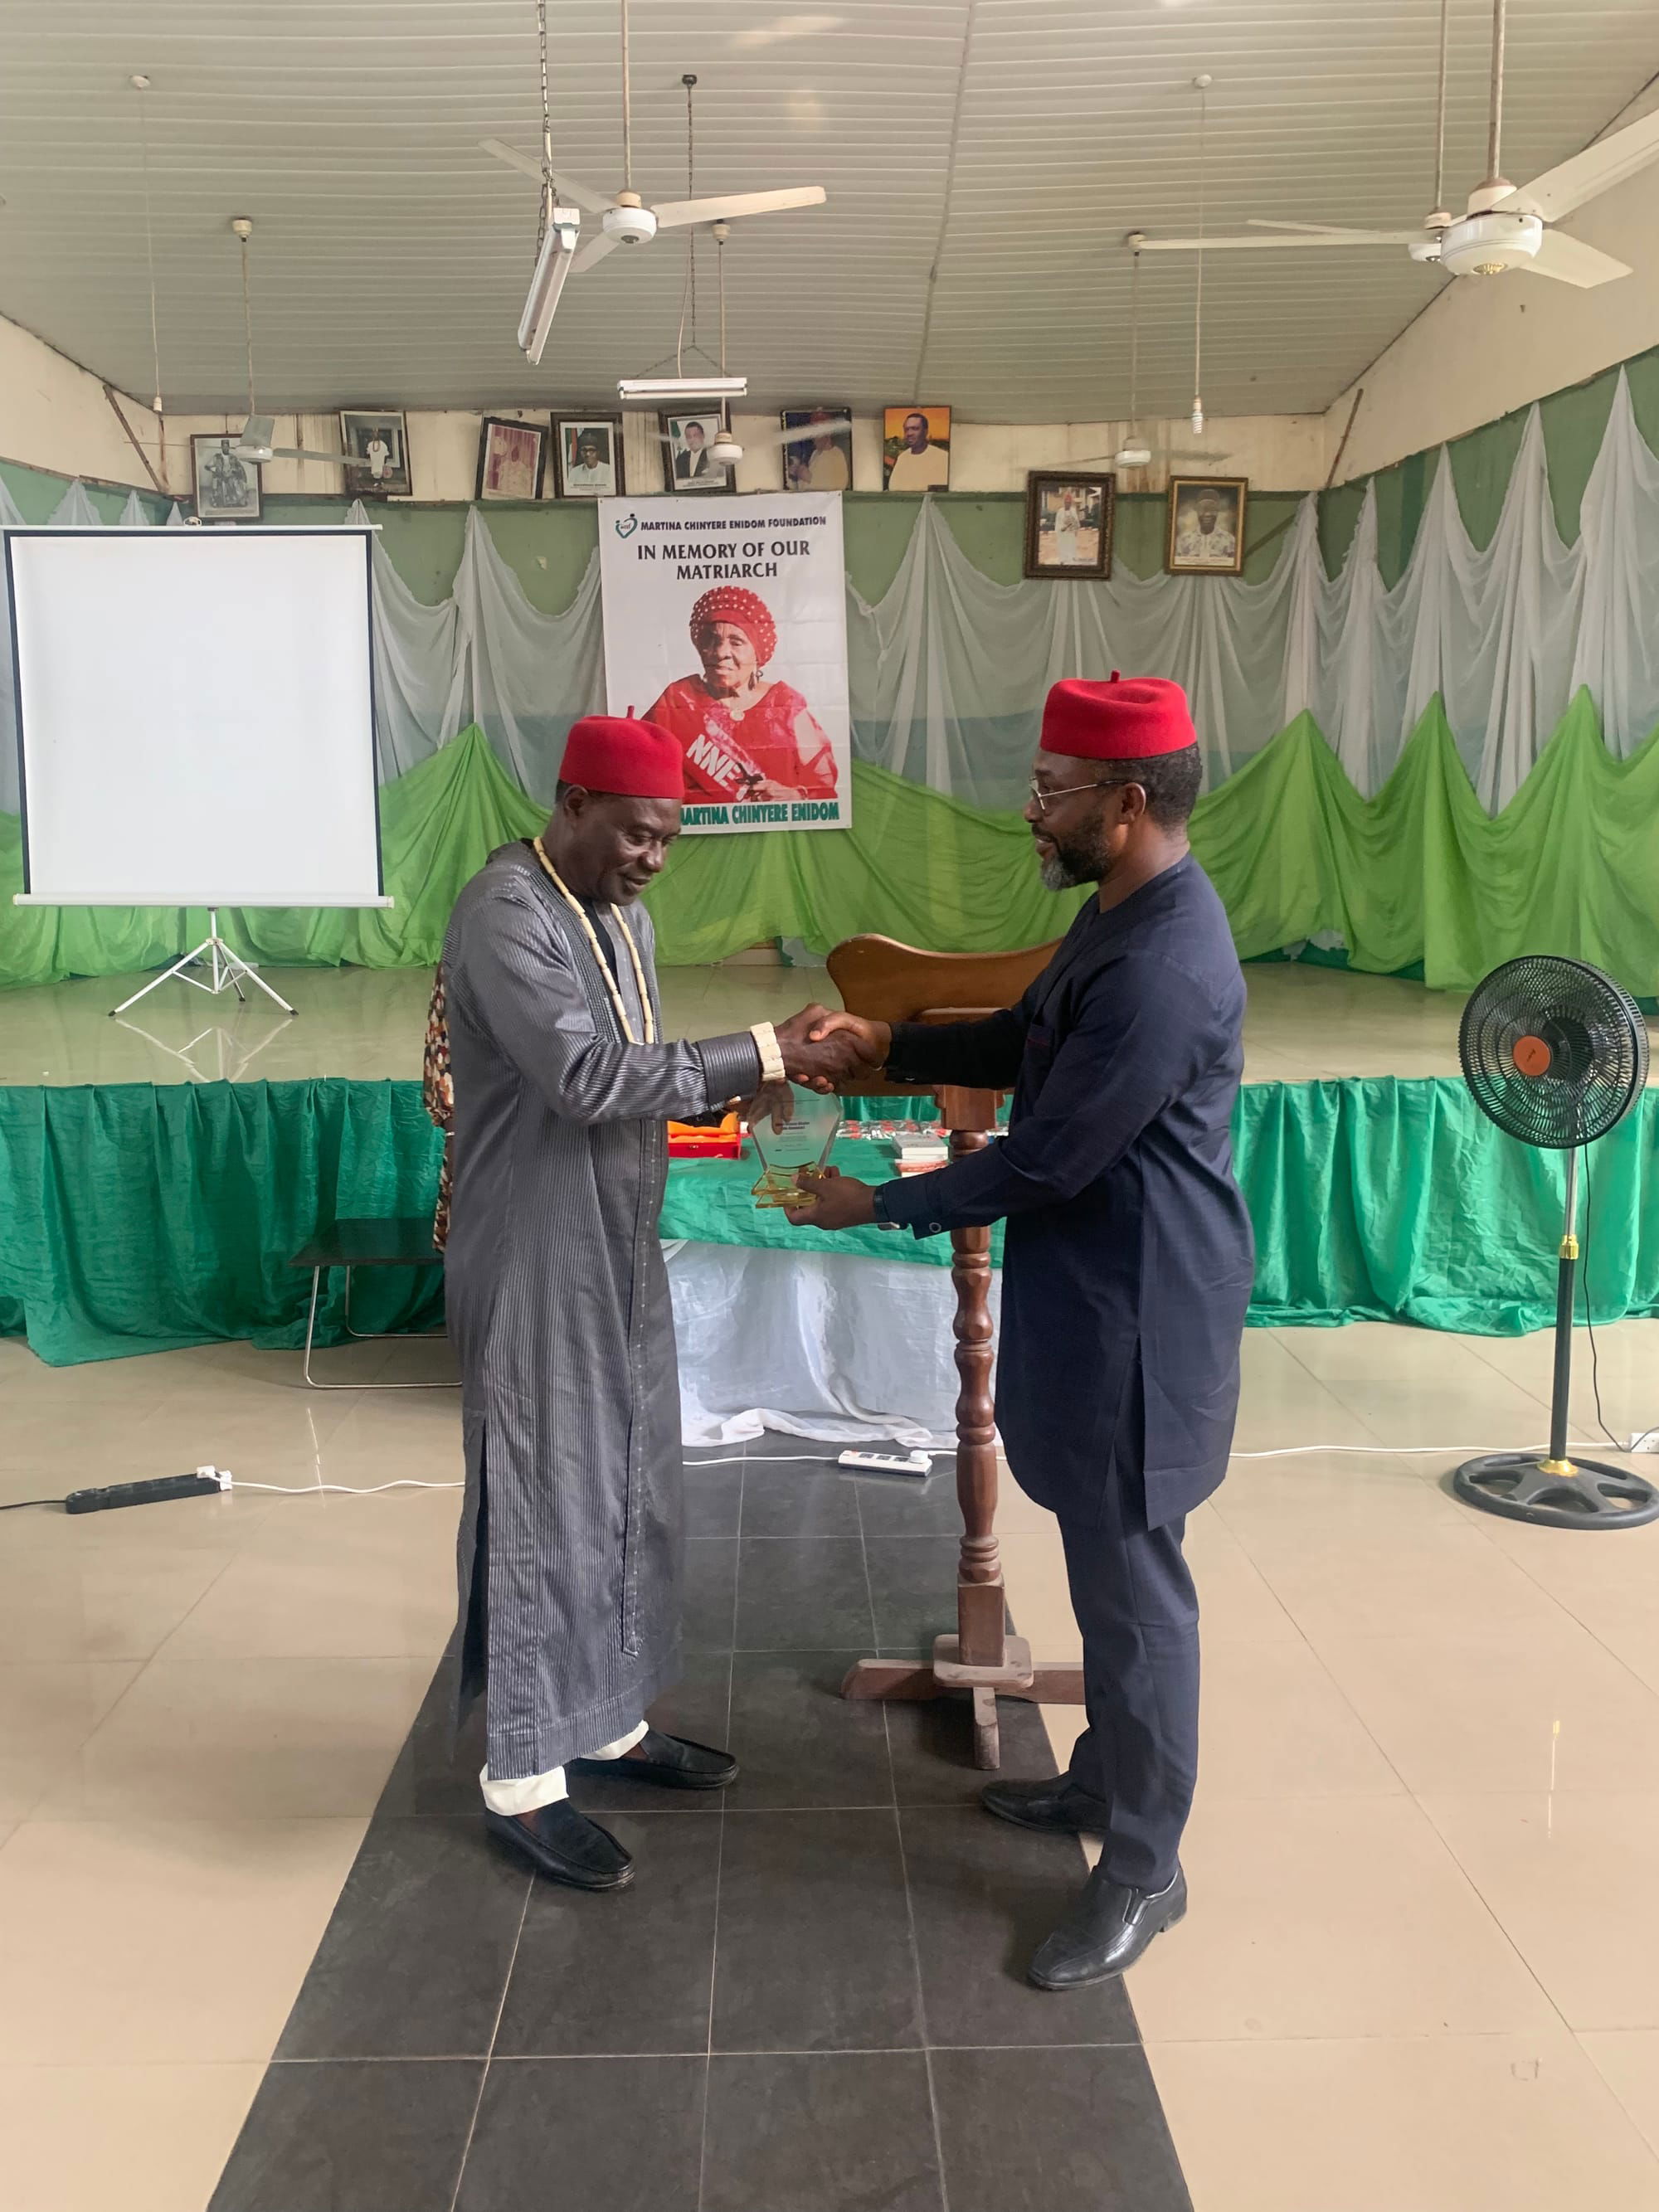 The Chairman of the occasion [Chief Osita Chidoka] delivering the award to the representatives of Ide Akwaeze